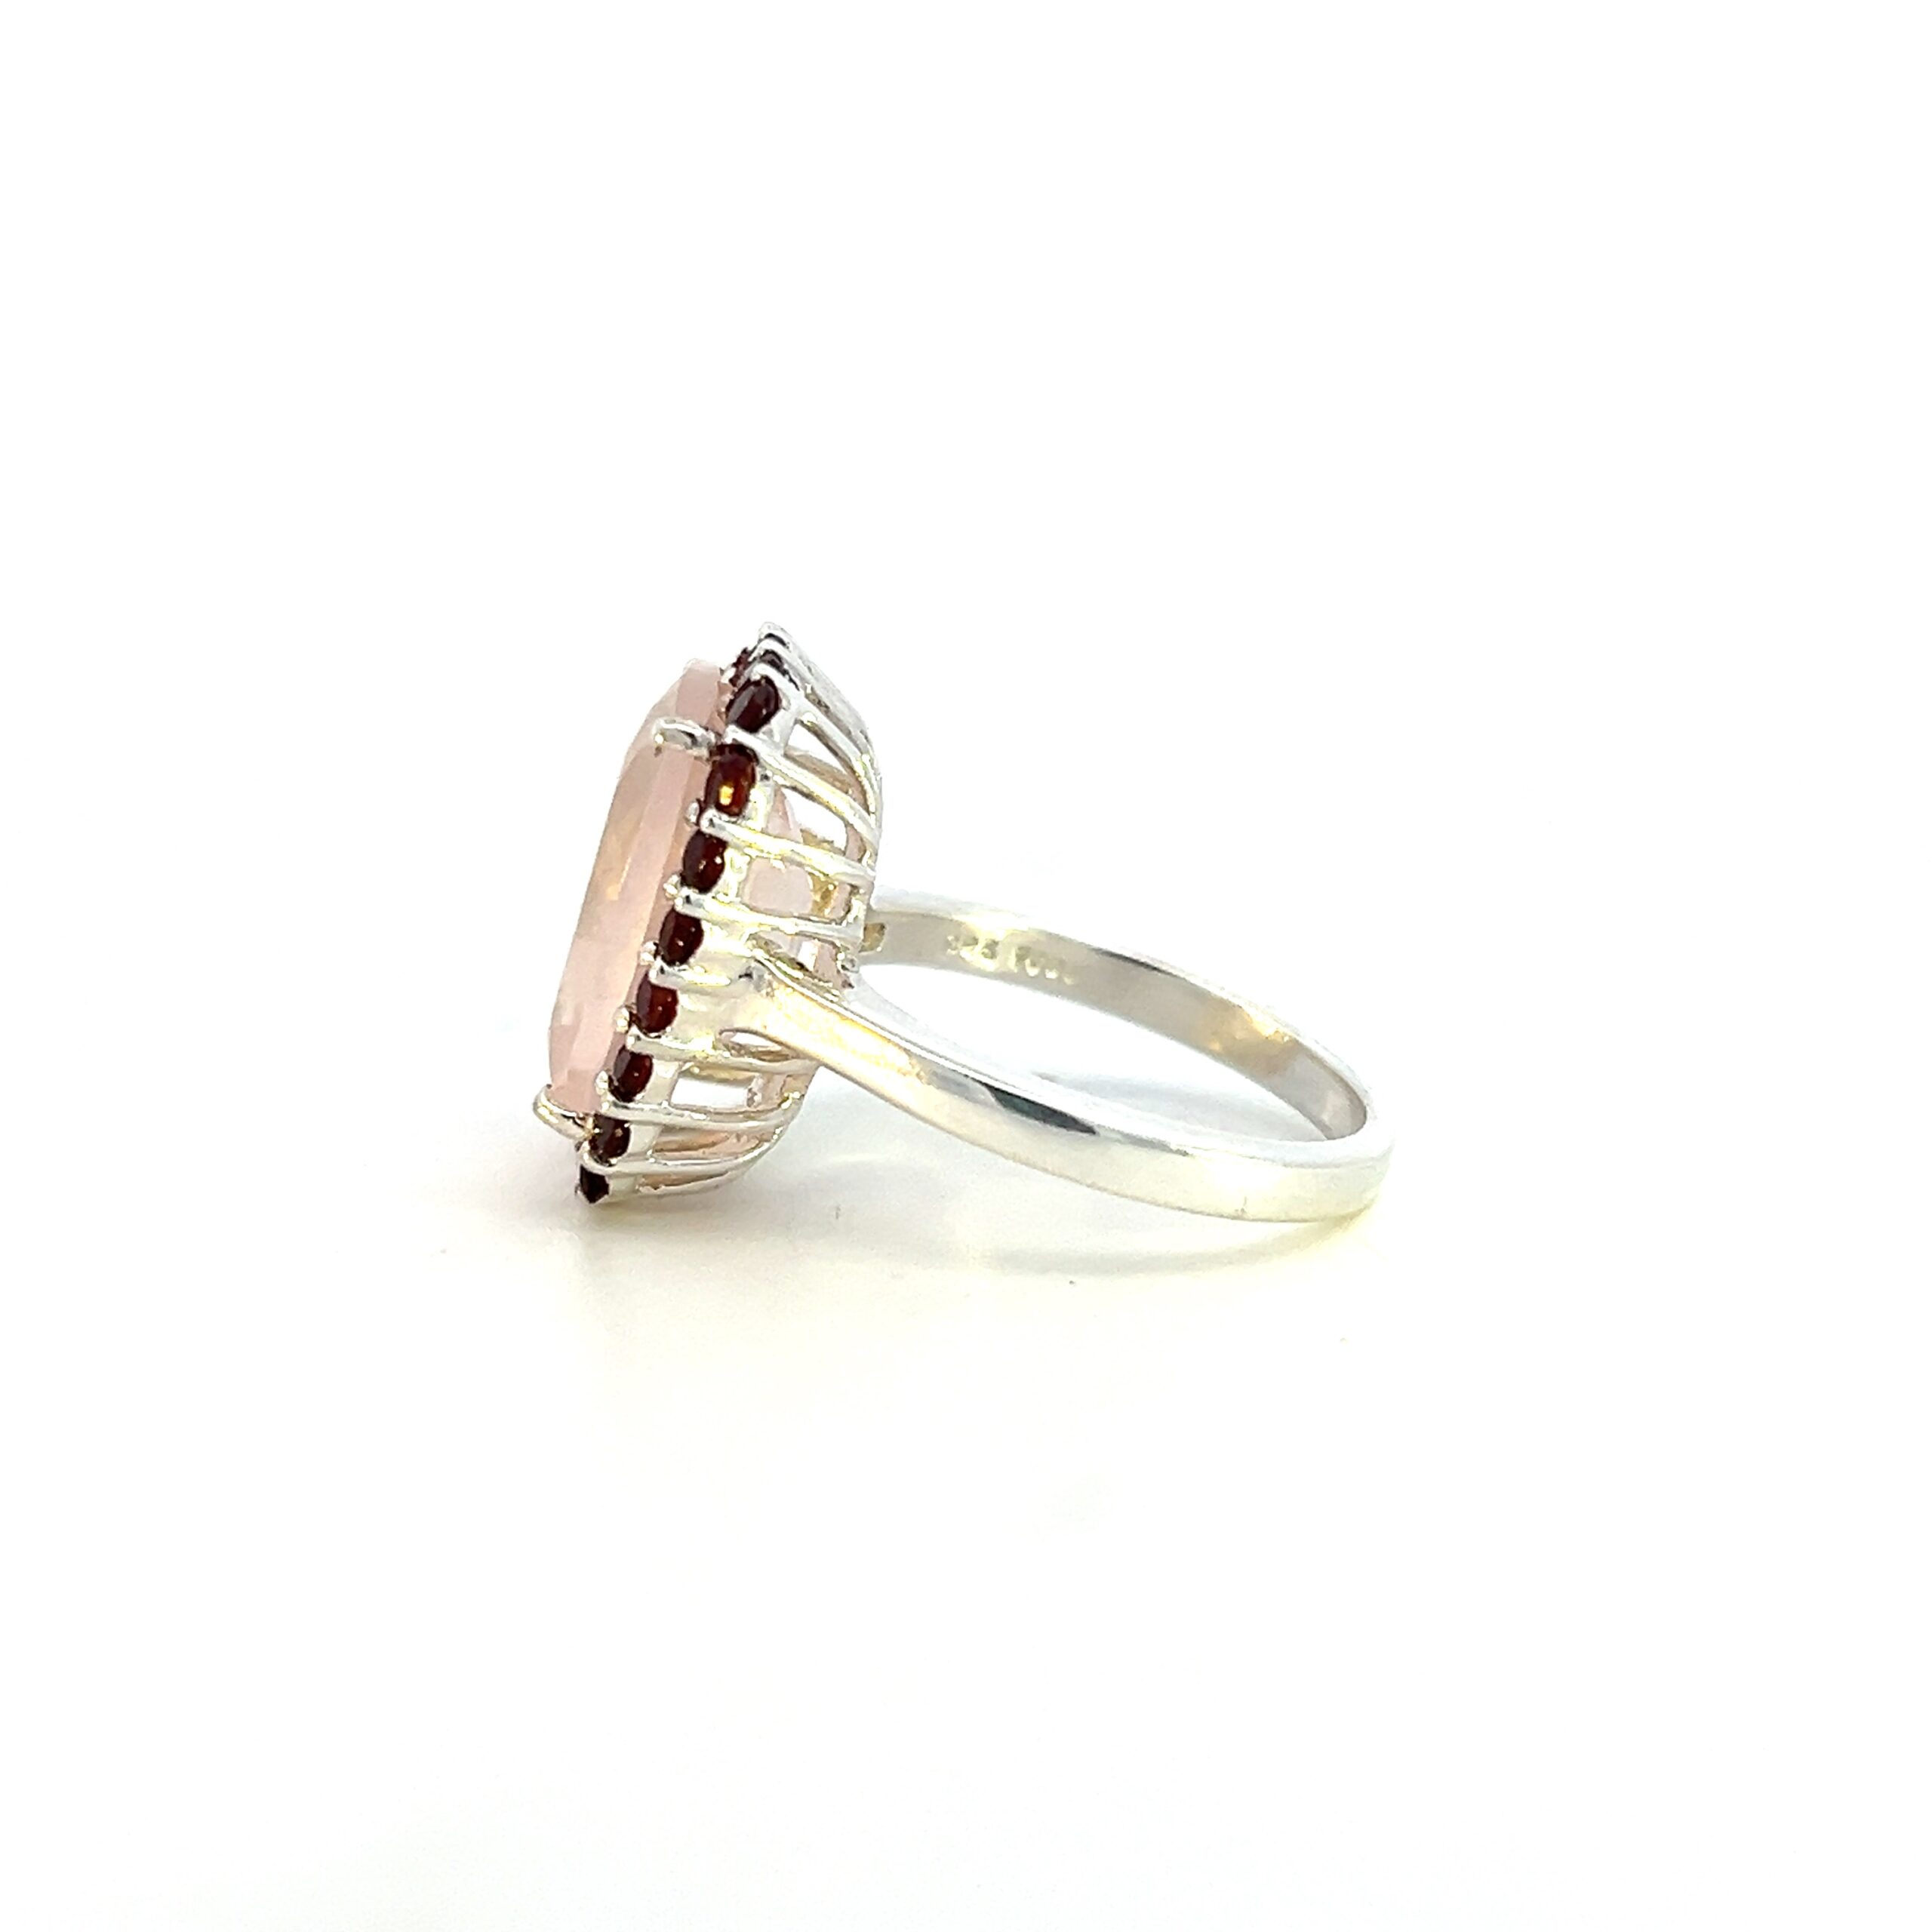 One estate sterling silver rose quartz and garnet ring containing elongated cushion-shaped faceted rose quartz measuring 14x10mm surrounded by a halo of 22 round garnets measuring 2mm each.